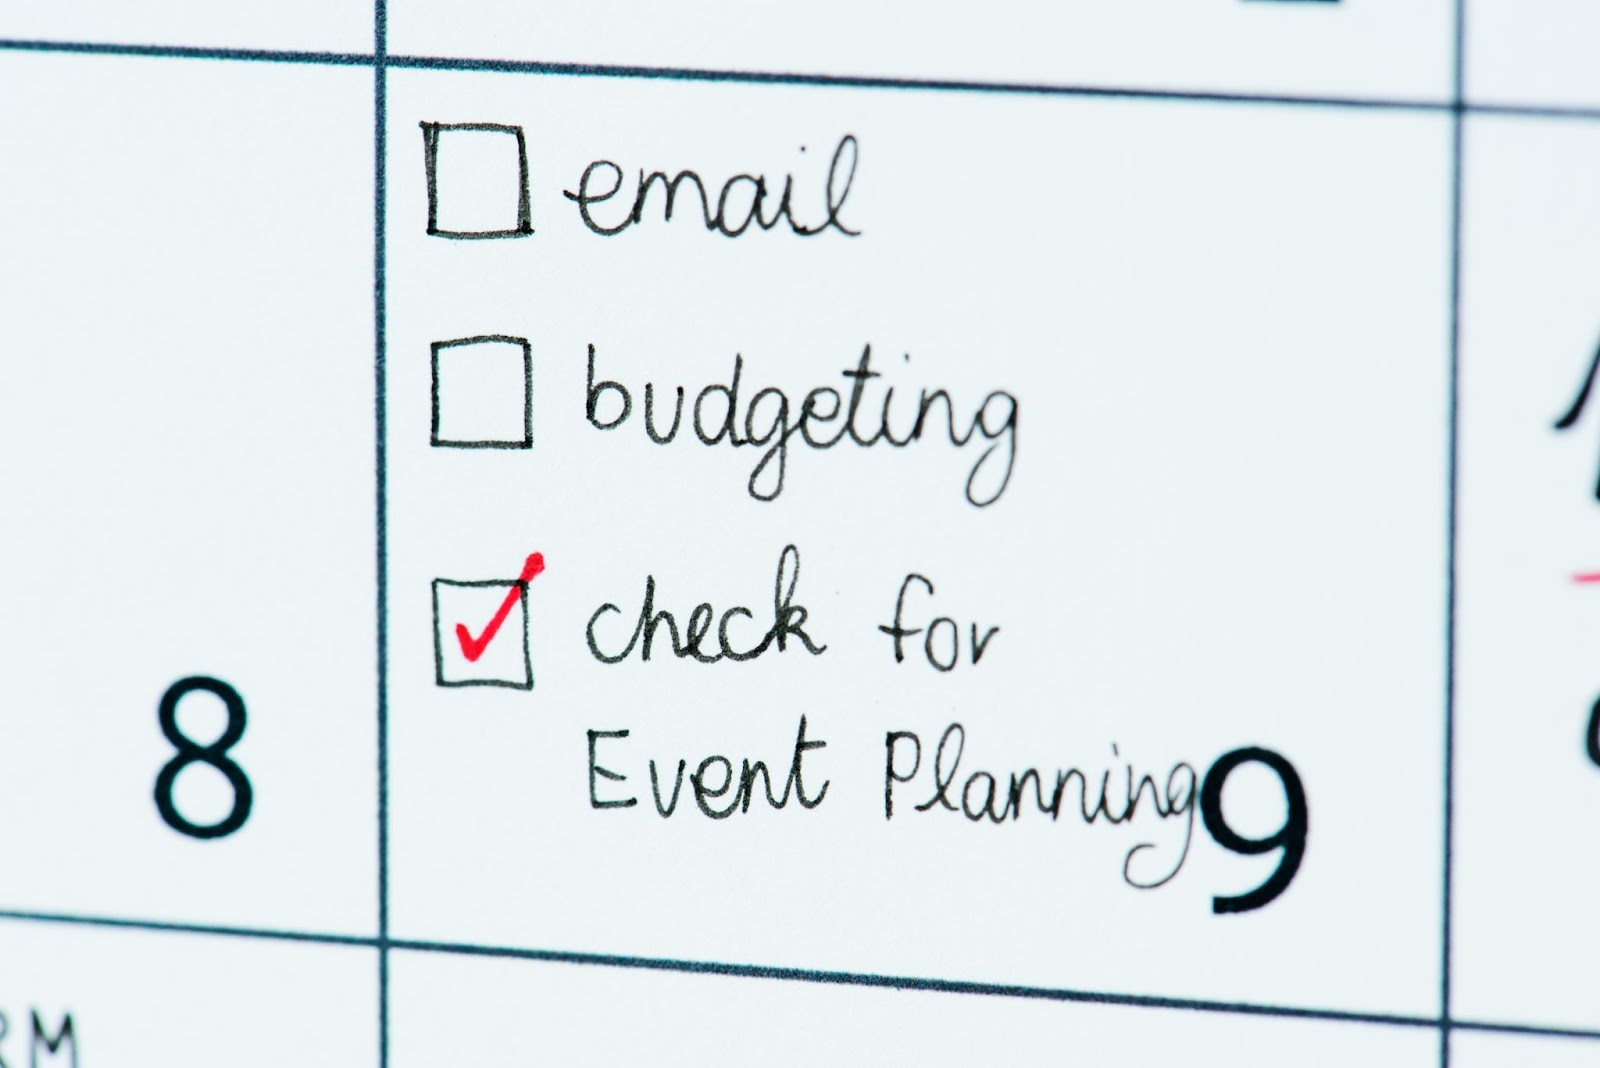 Close-up of a checklist with a red checkmark next to 'check for event planning,' indicating a completed task. The checklist includes other items like 'email' and 'budgeting,' which are yet to be checked off. The focus on the event planning task suggests a prioritized action in the context of organizing an event, set against the backdrop of a planner or calendar.